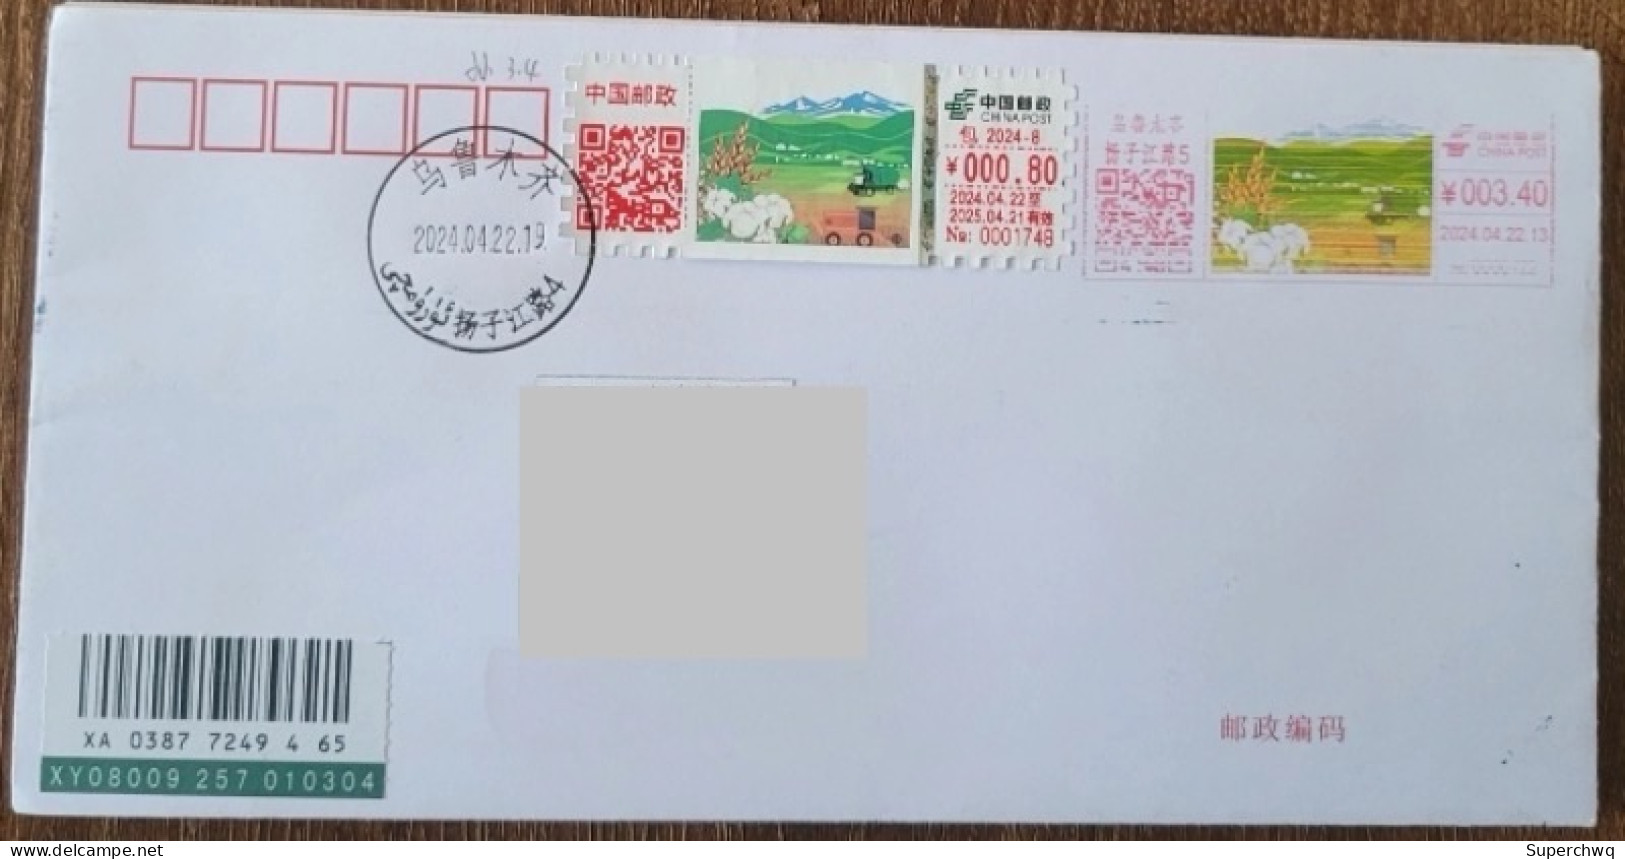 China Cover "Our Fields" (Urumqi) Postage Label First Day Registered And Actual Shipping Seal - Covers